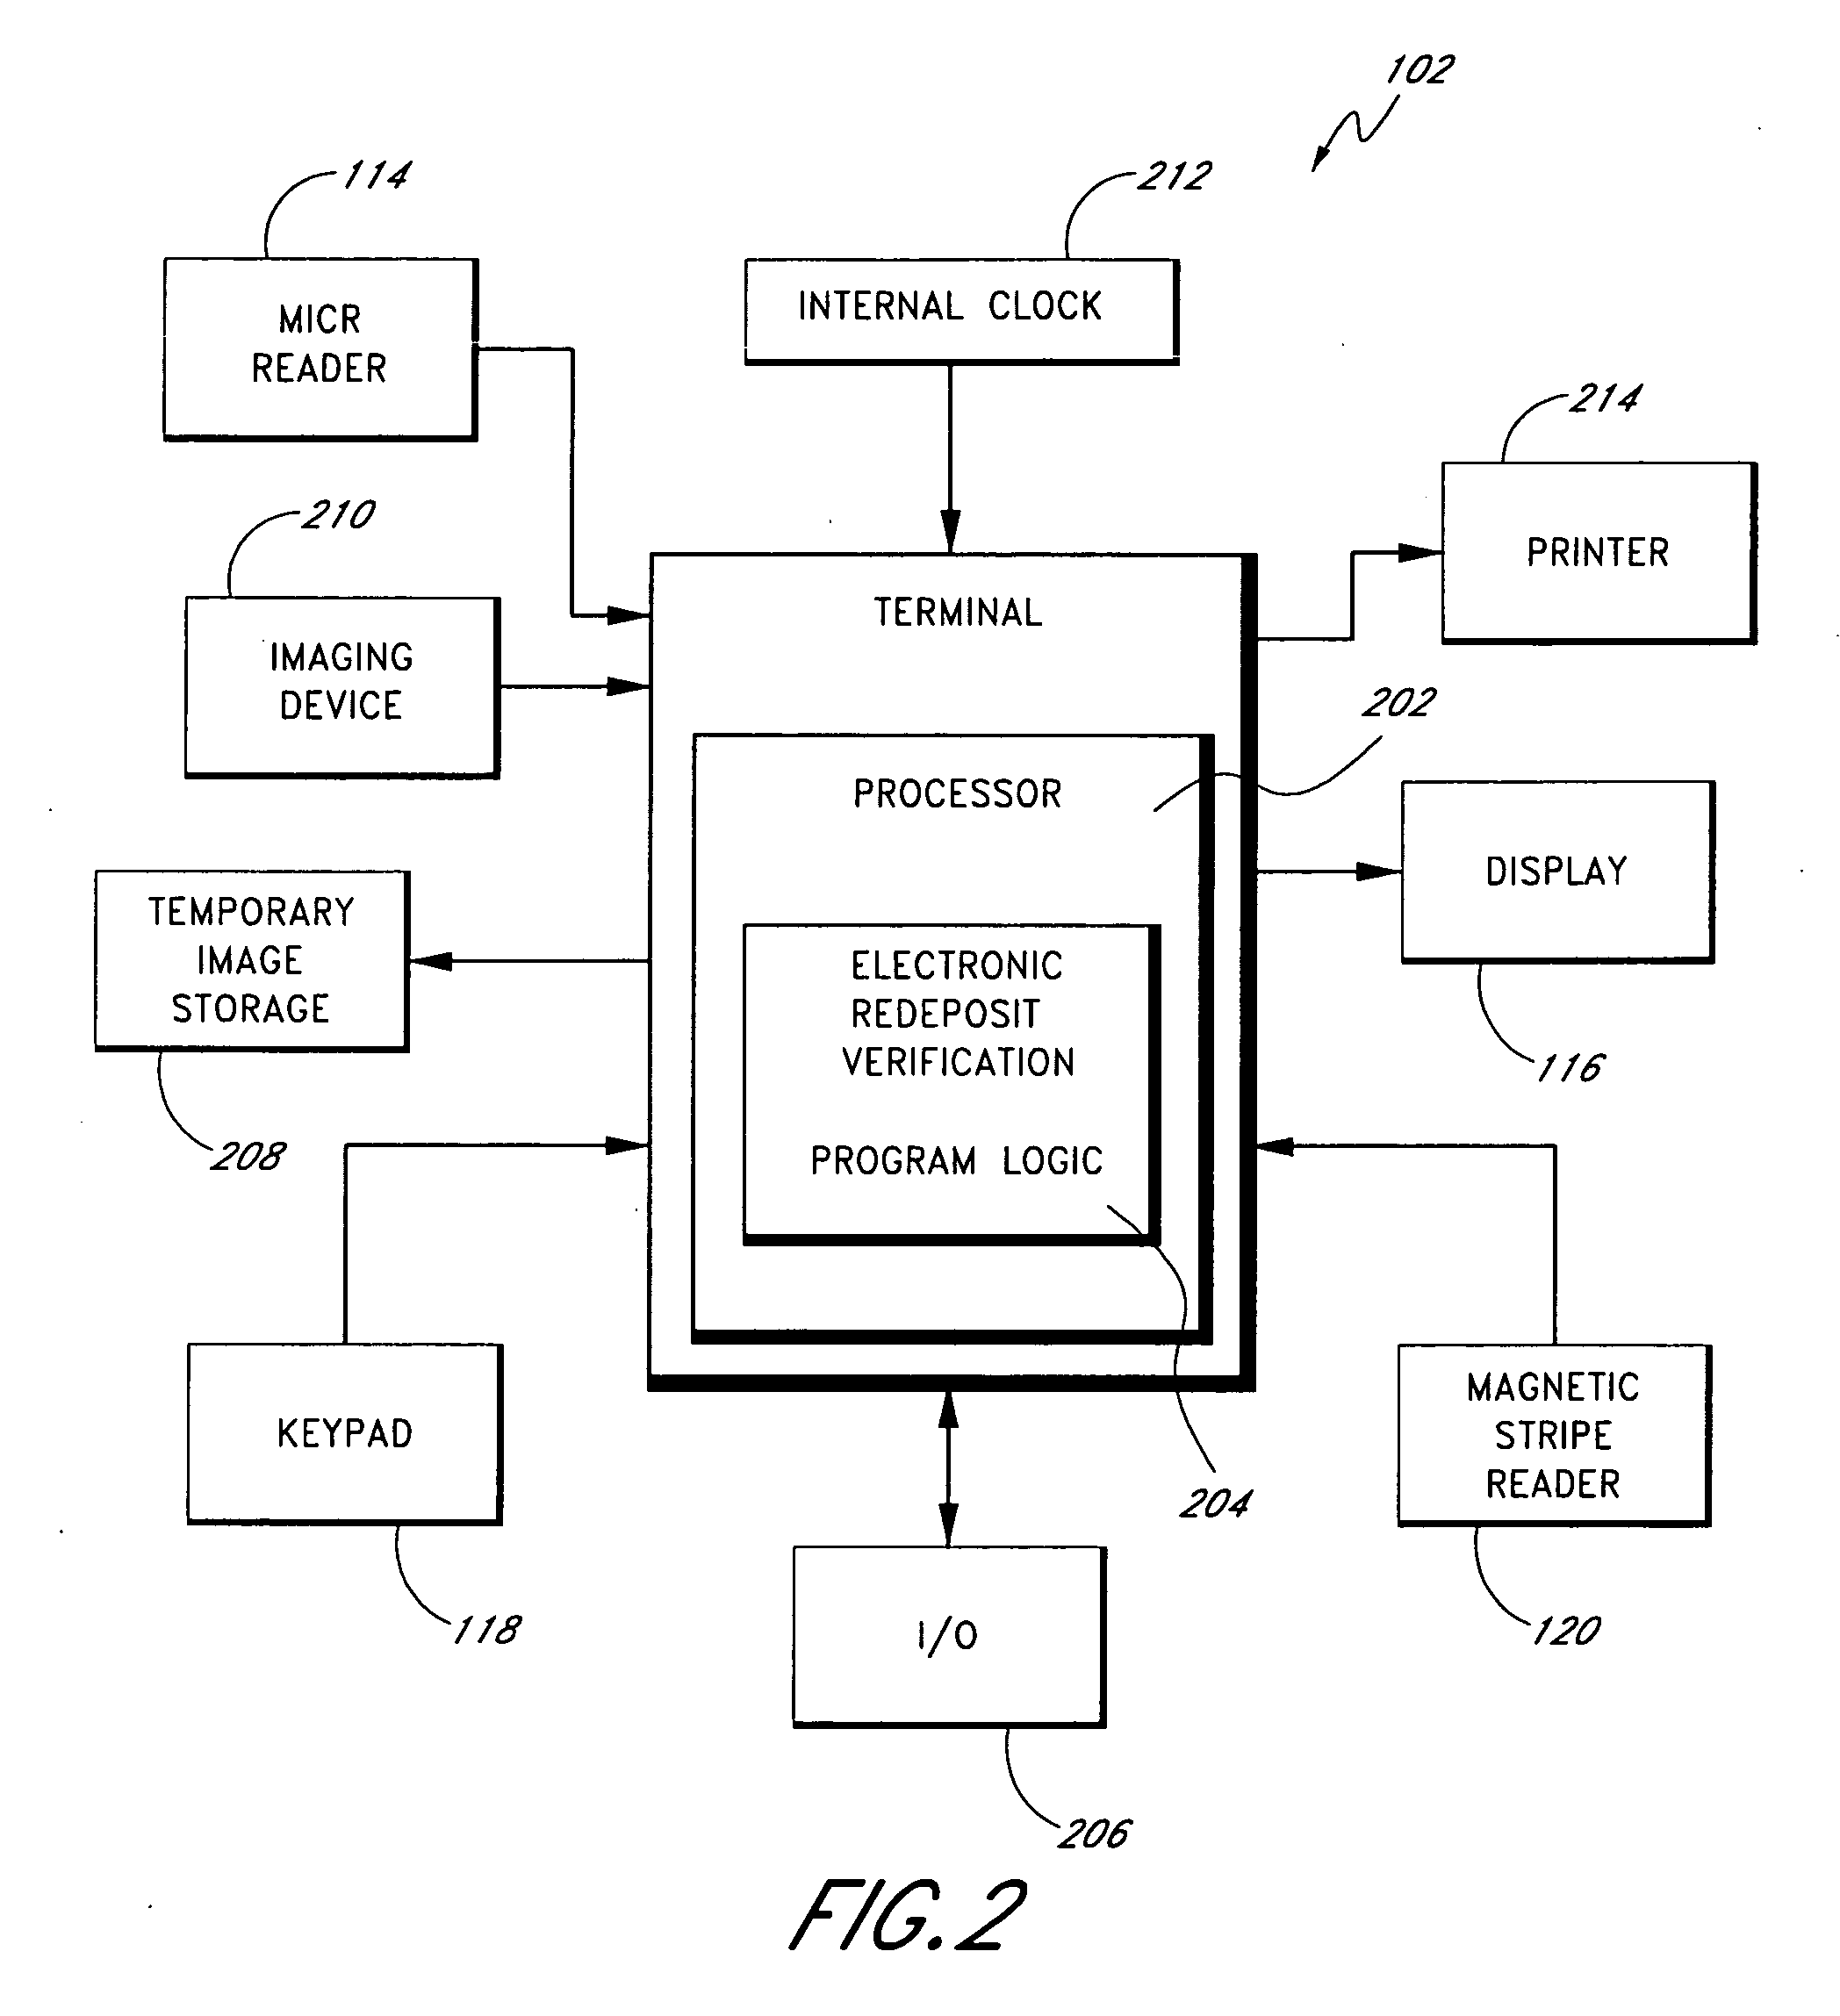 Apparatus and method for amount verification of paper checks for electronic redeposit